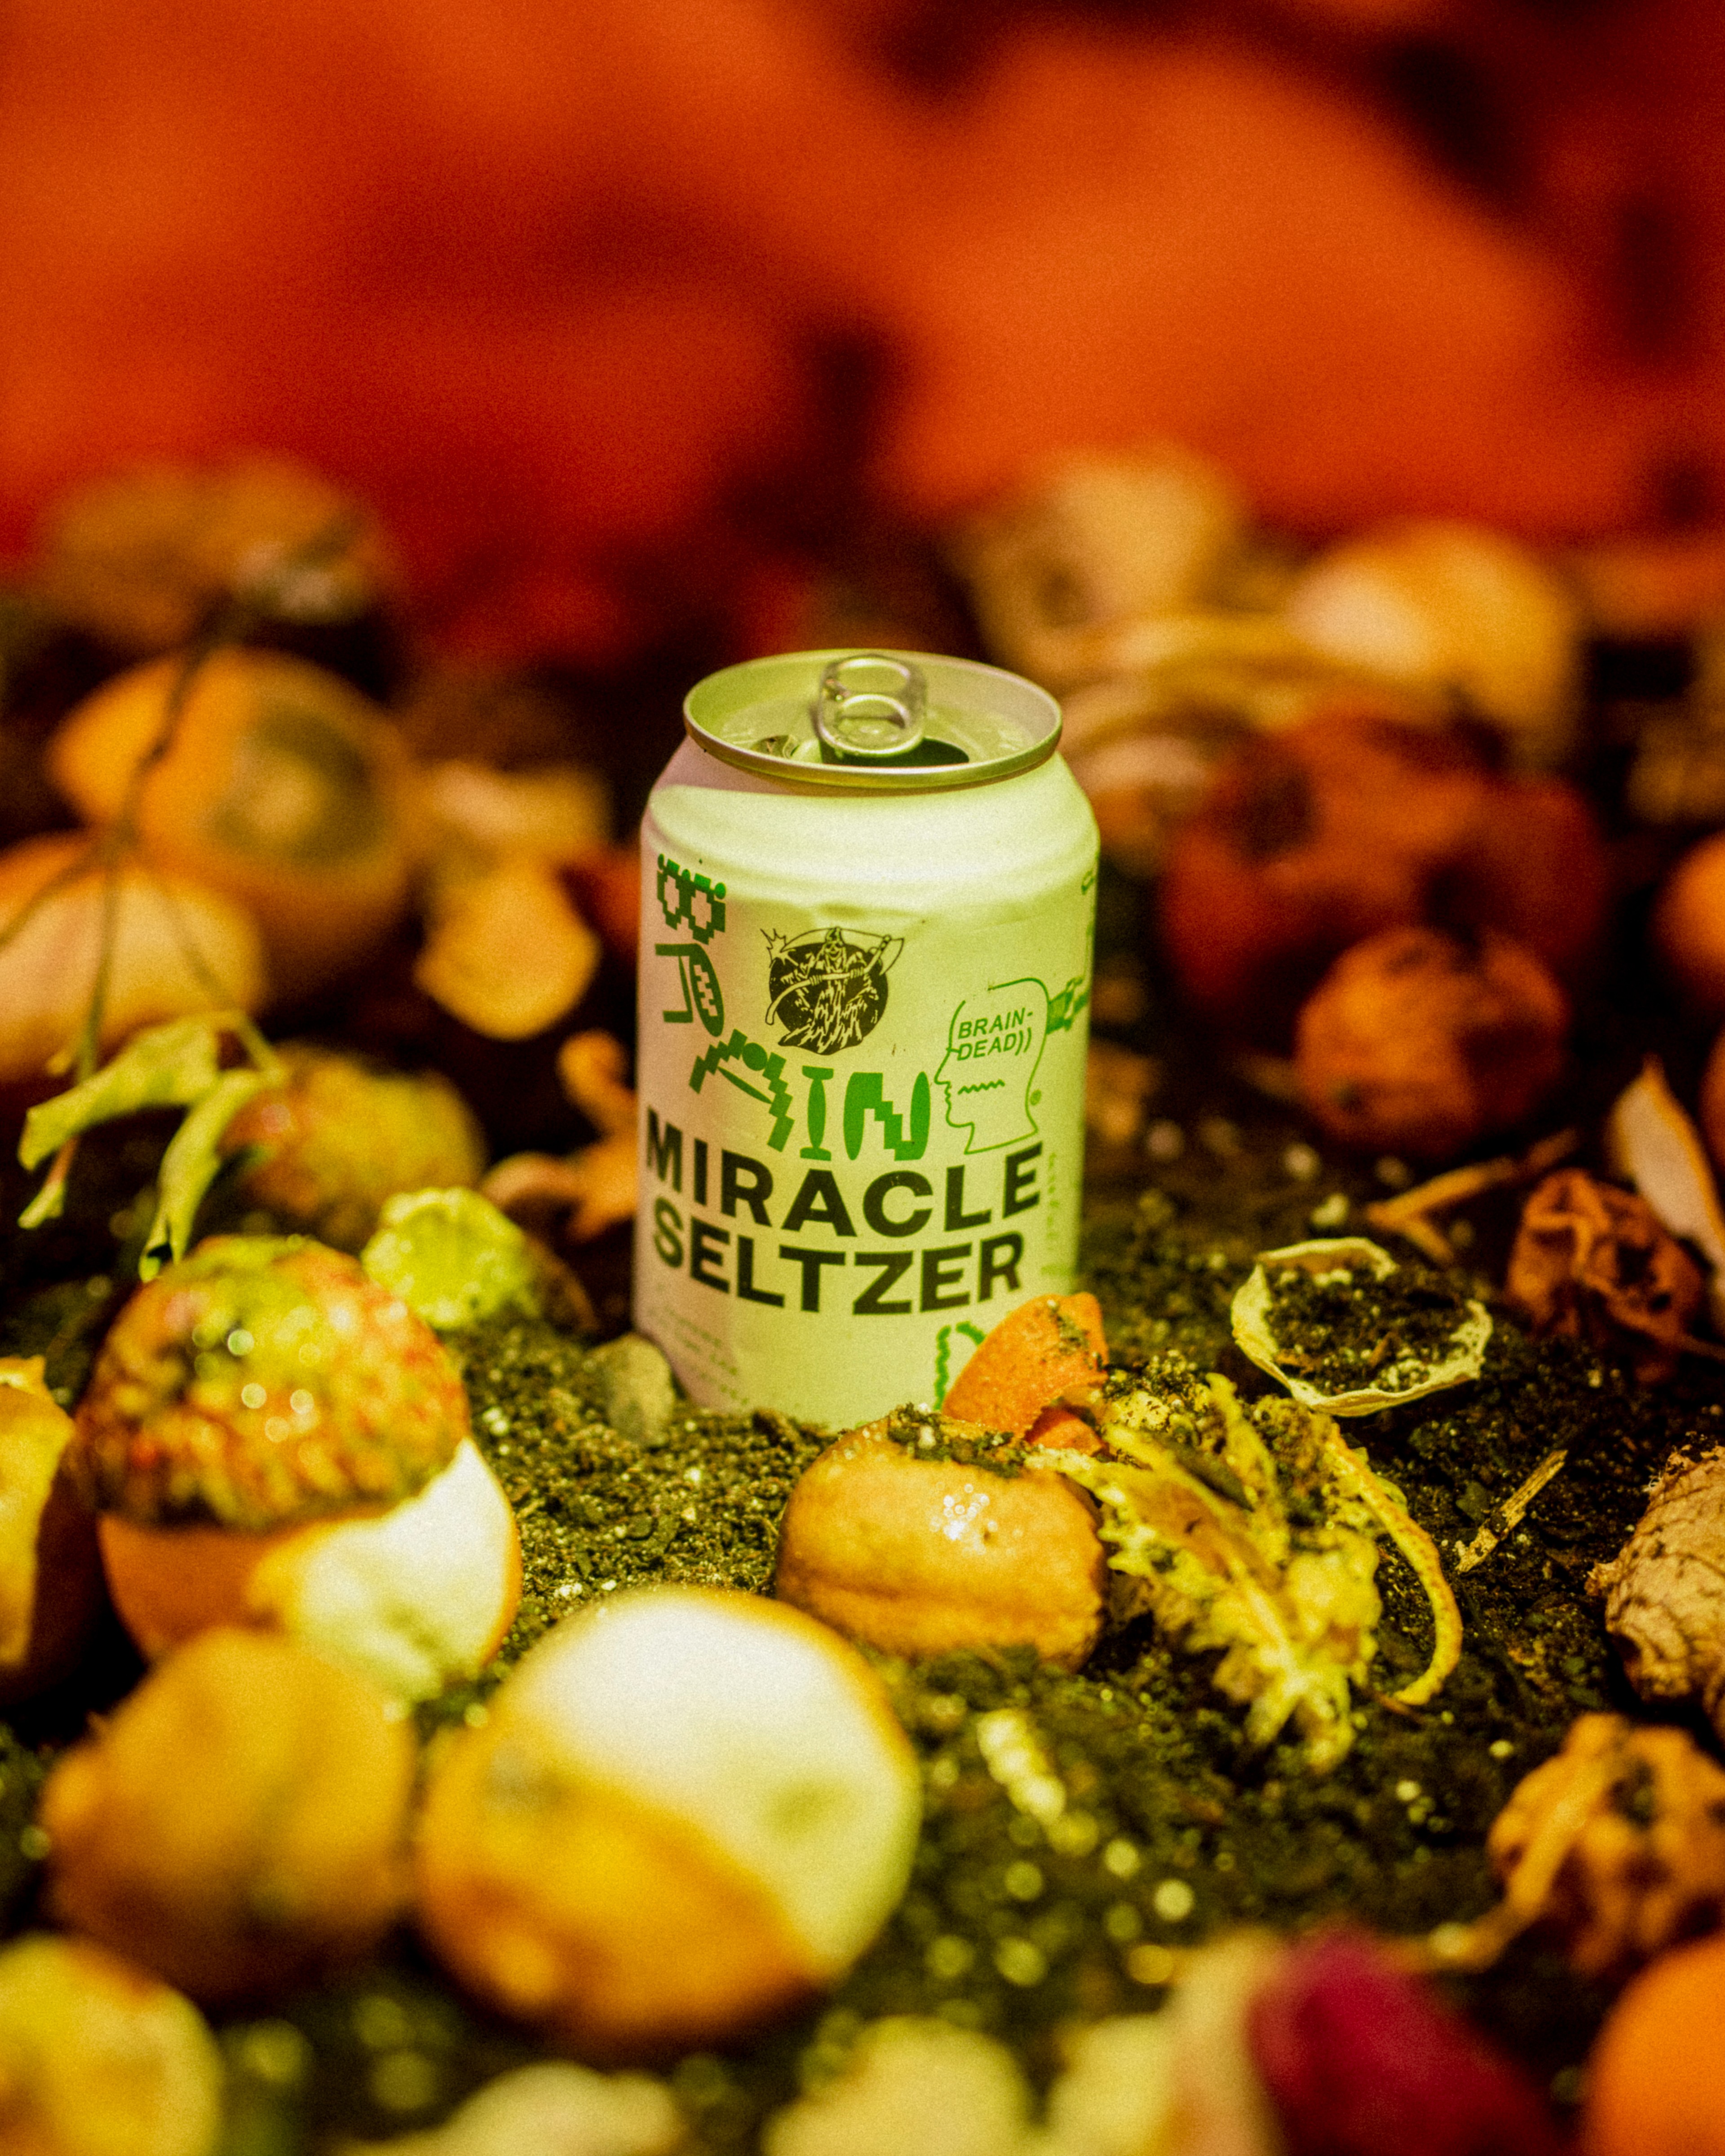 photo of miracle seltzer can surrounded by mushrooms